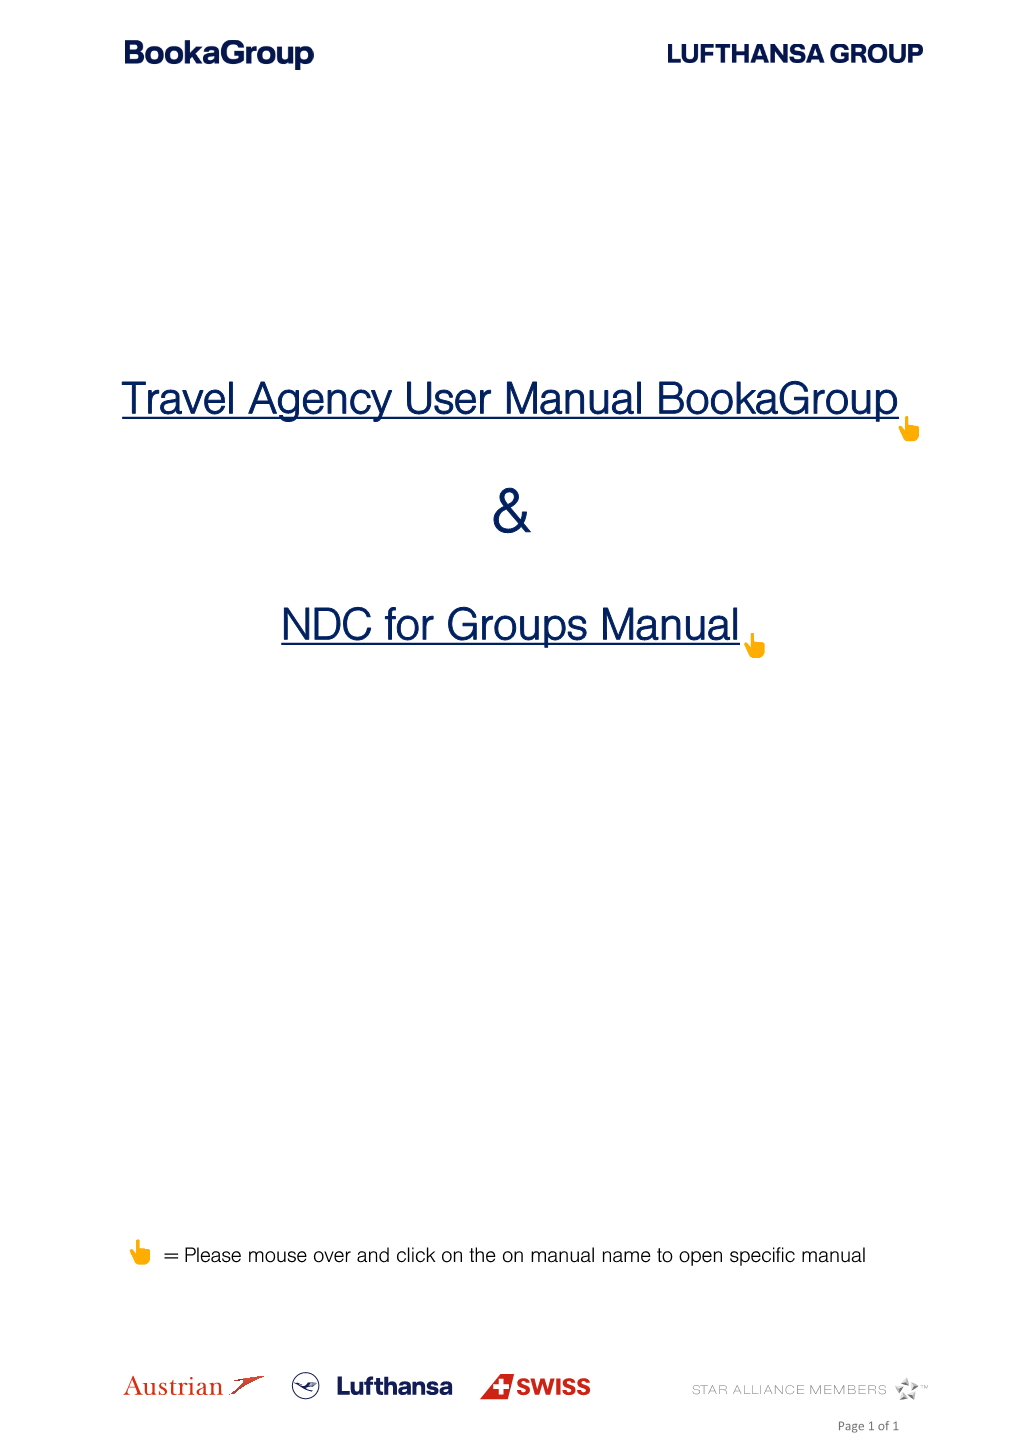 Travel Agency User Manual Bookagroup